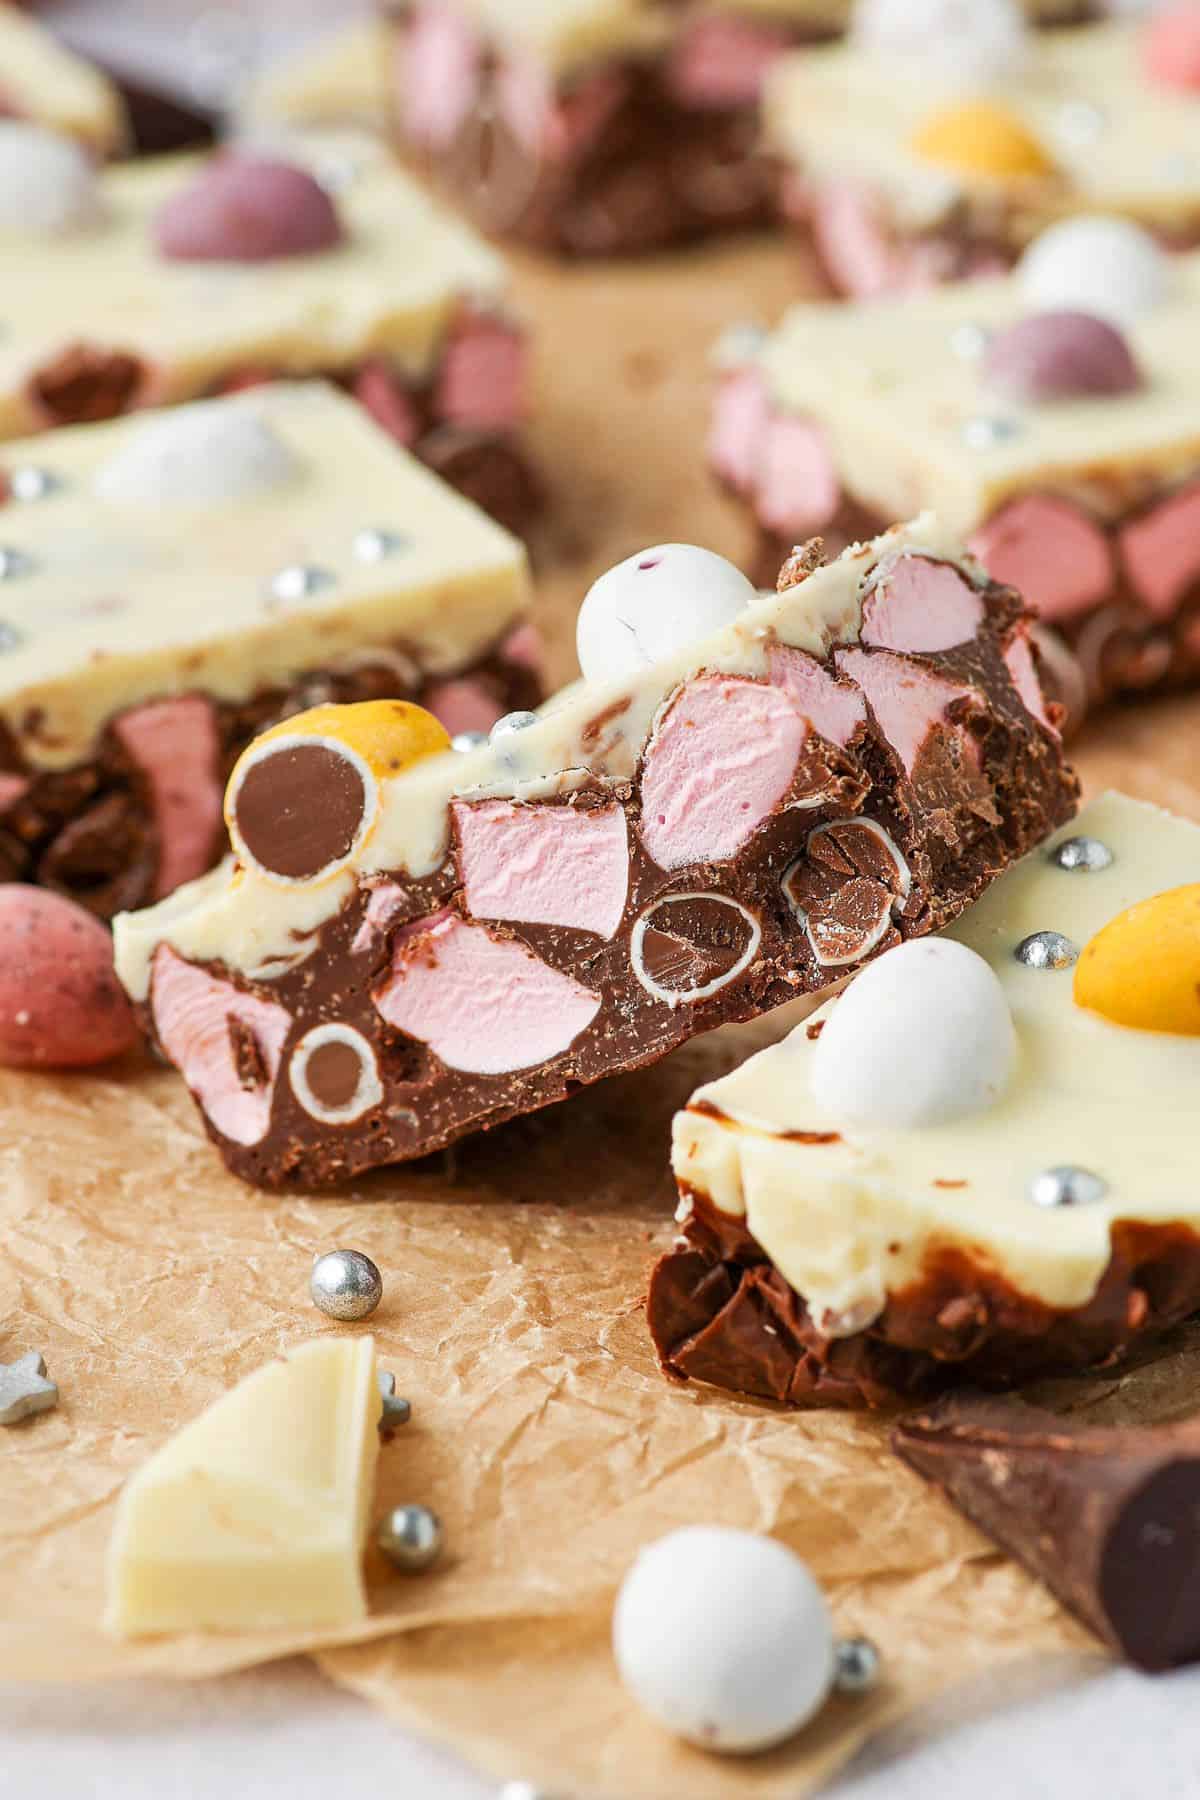 A piece of rocky road sitting on another piece on an angle to show the filling.